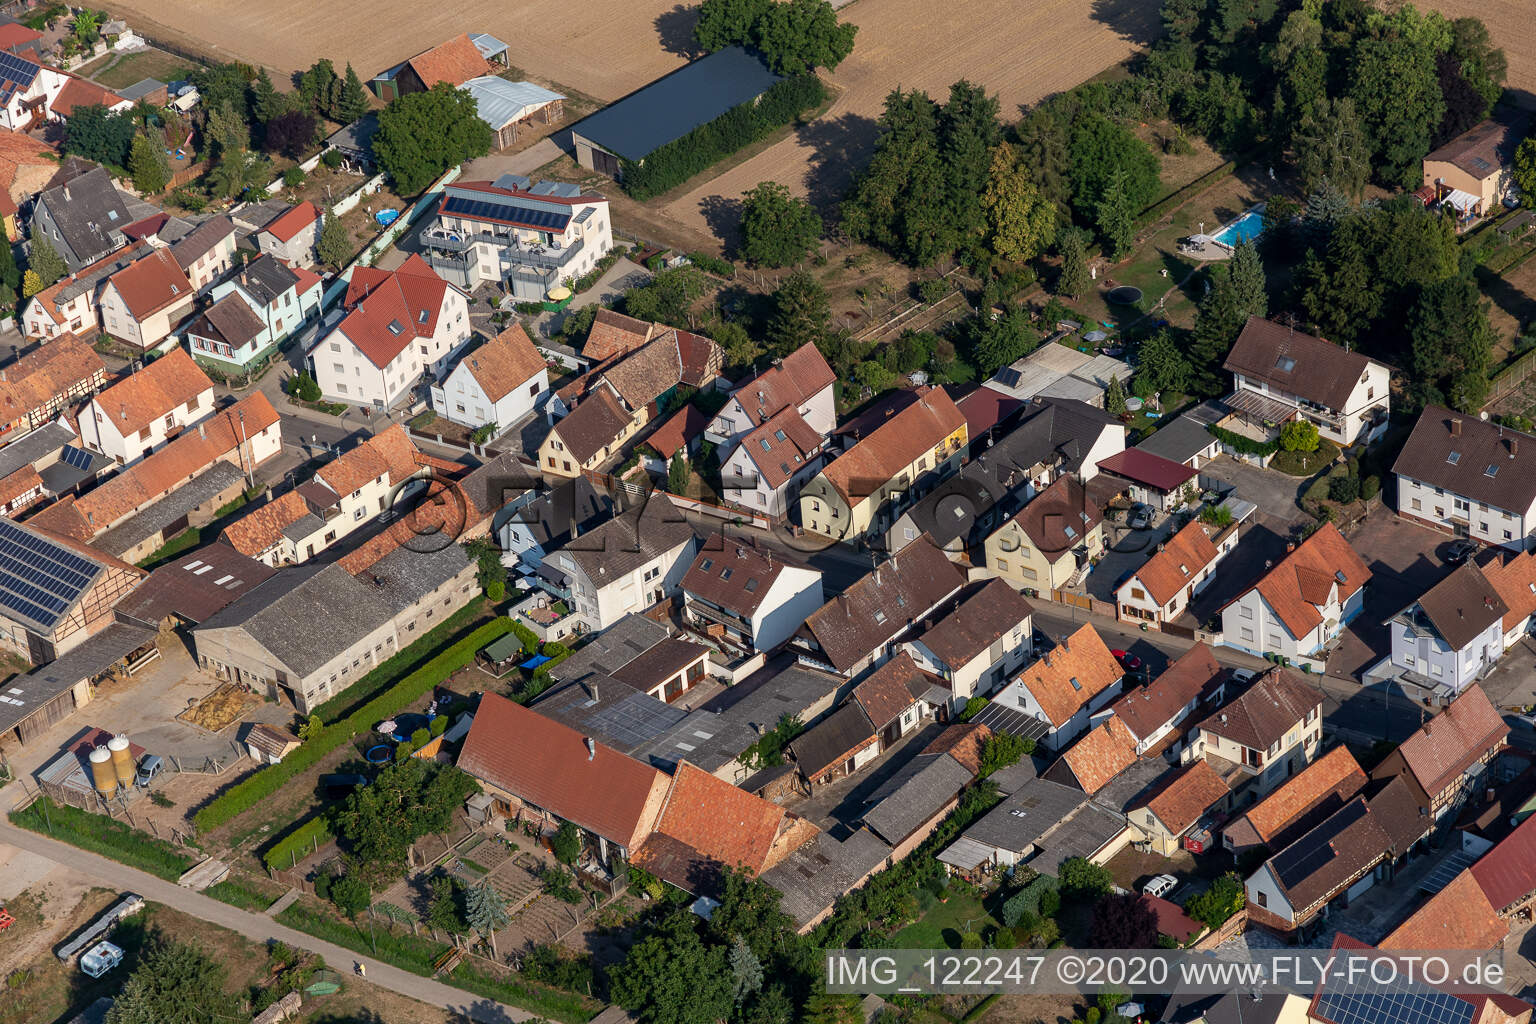 Saarstr in Kandel in the state Rhineland-Palatinate, Germany seen from above